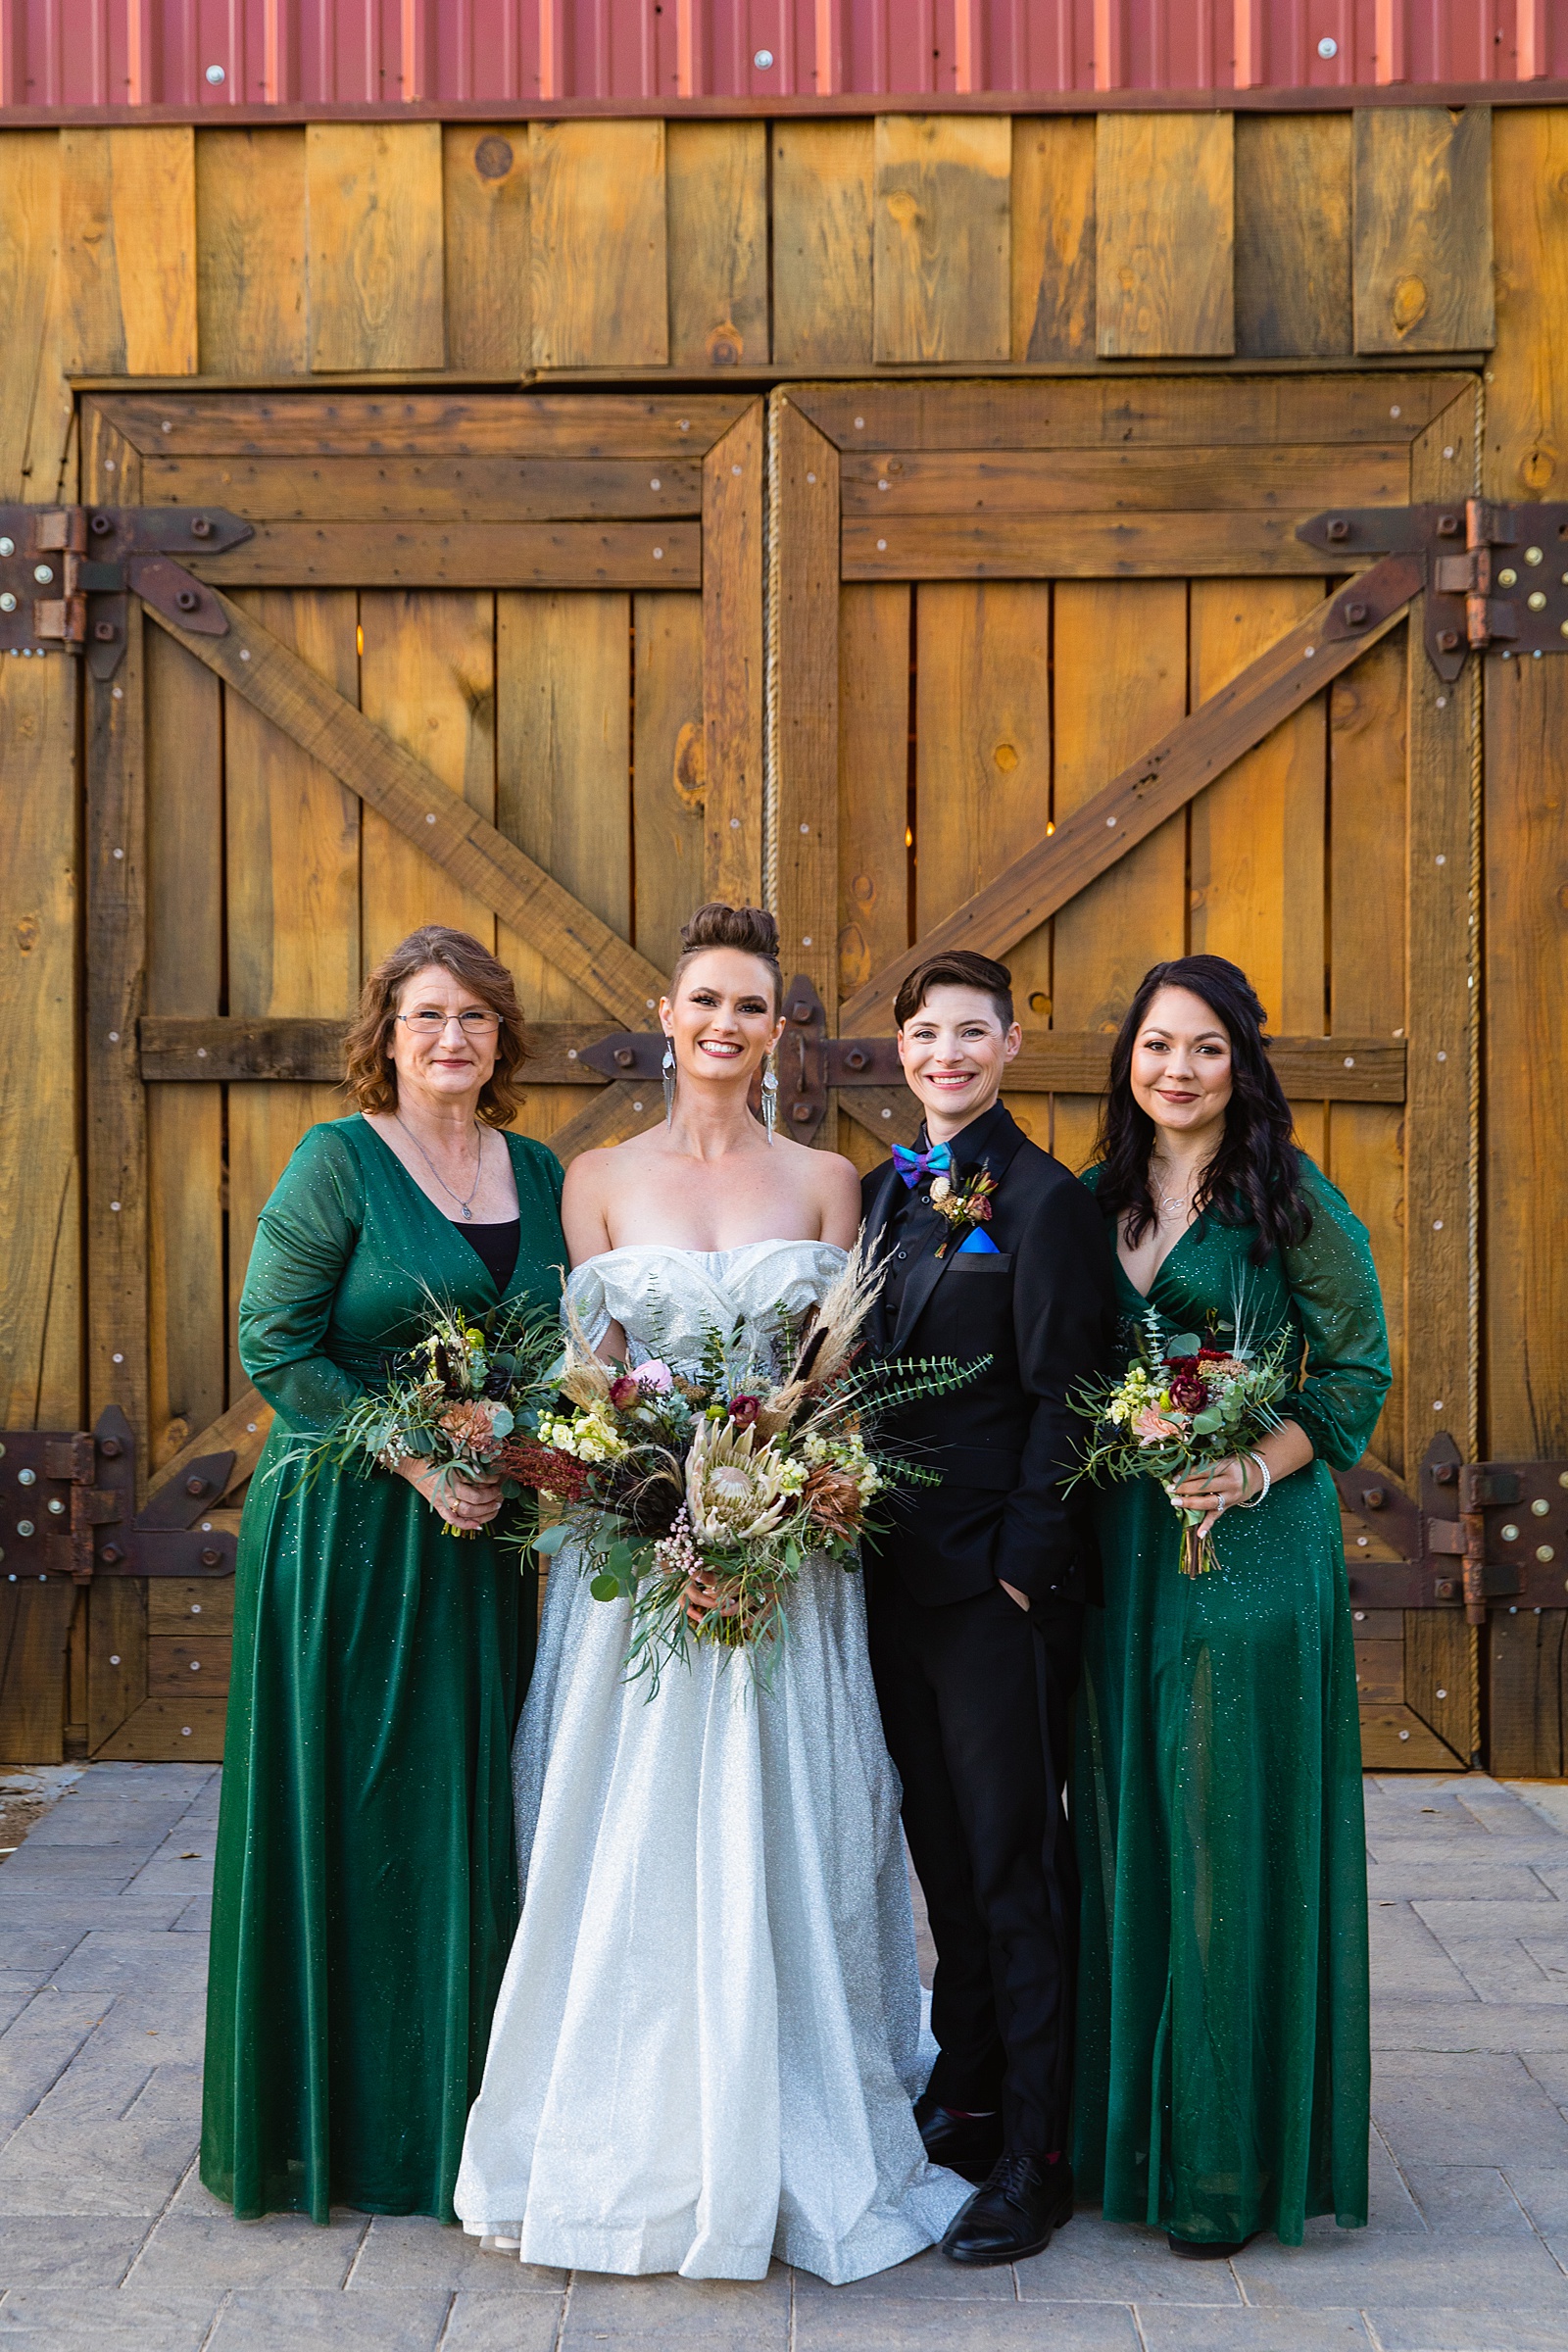 Bridal party together at a Mortimer Farms wedding by Arizona wedding photographer PMA Photography.